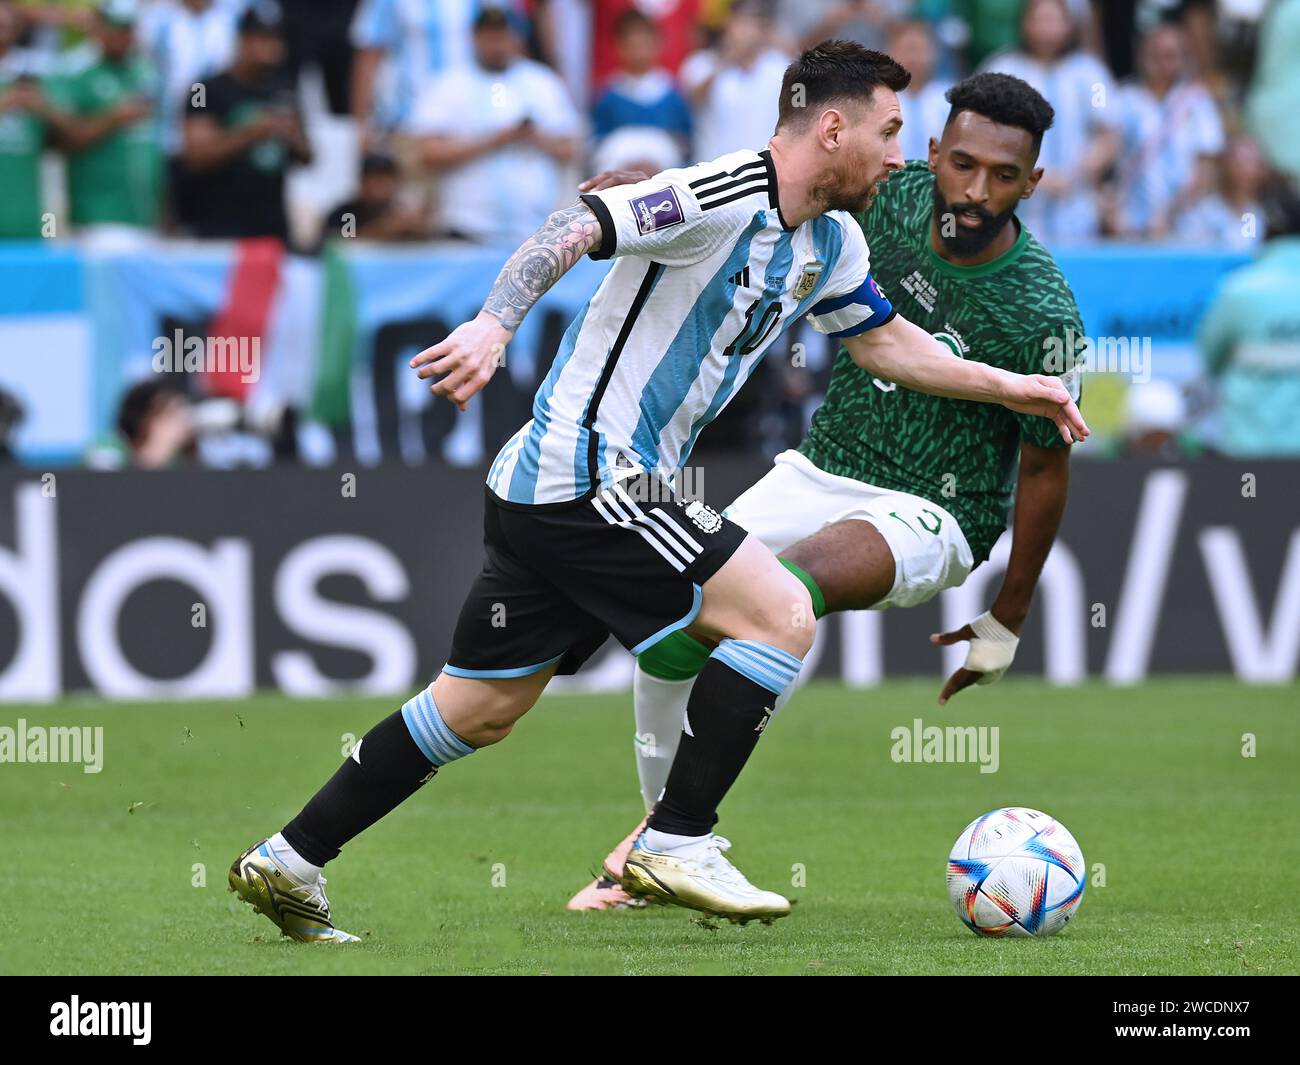 Lionel Messi looks ahead as he plans his next move against a Saudi Arabian defender during the 2022 FIFA World Cup in Qatar. Saudi Arabia wins 2-1. Stock Photo